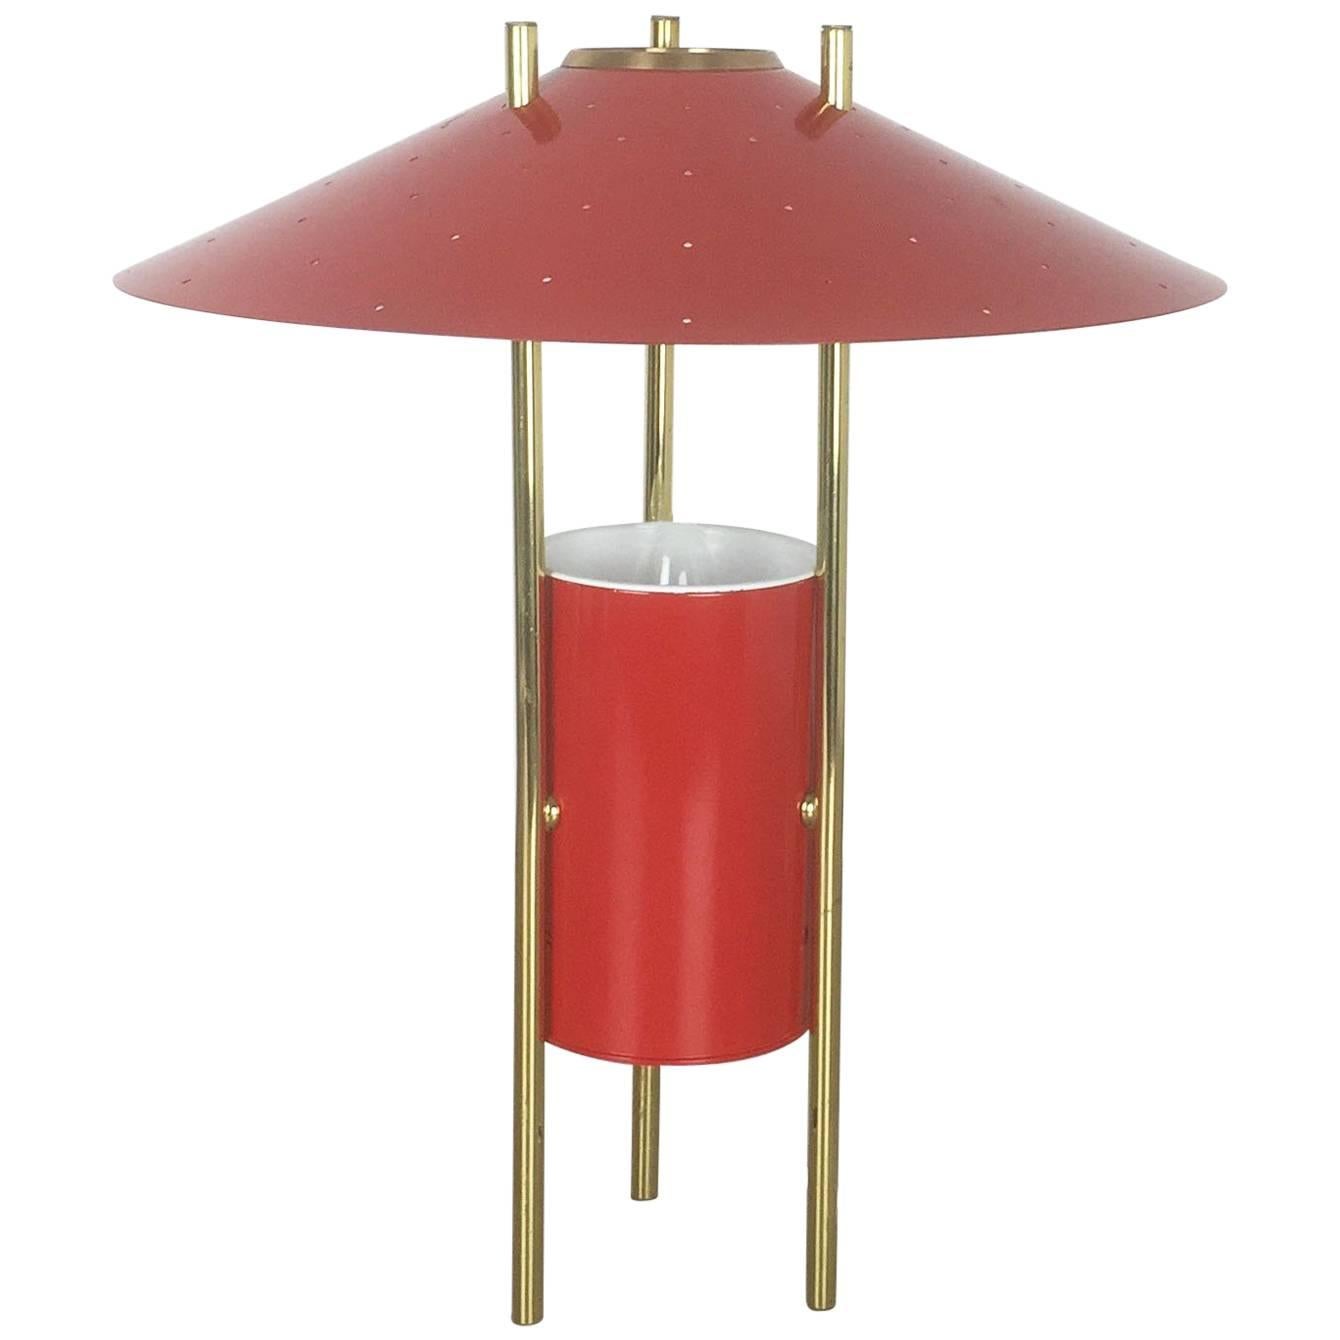 Vintage 1960s Modernist Midcentury Red Tripod Table Light Made in Italy, 1960s